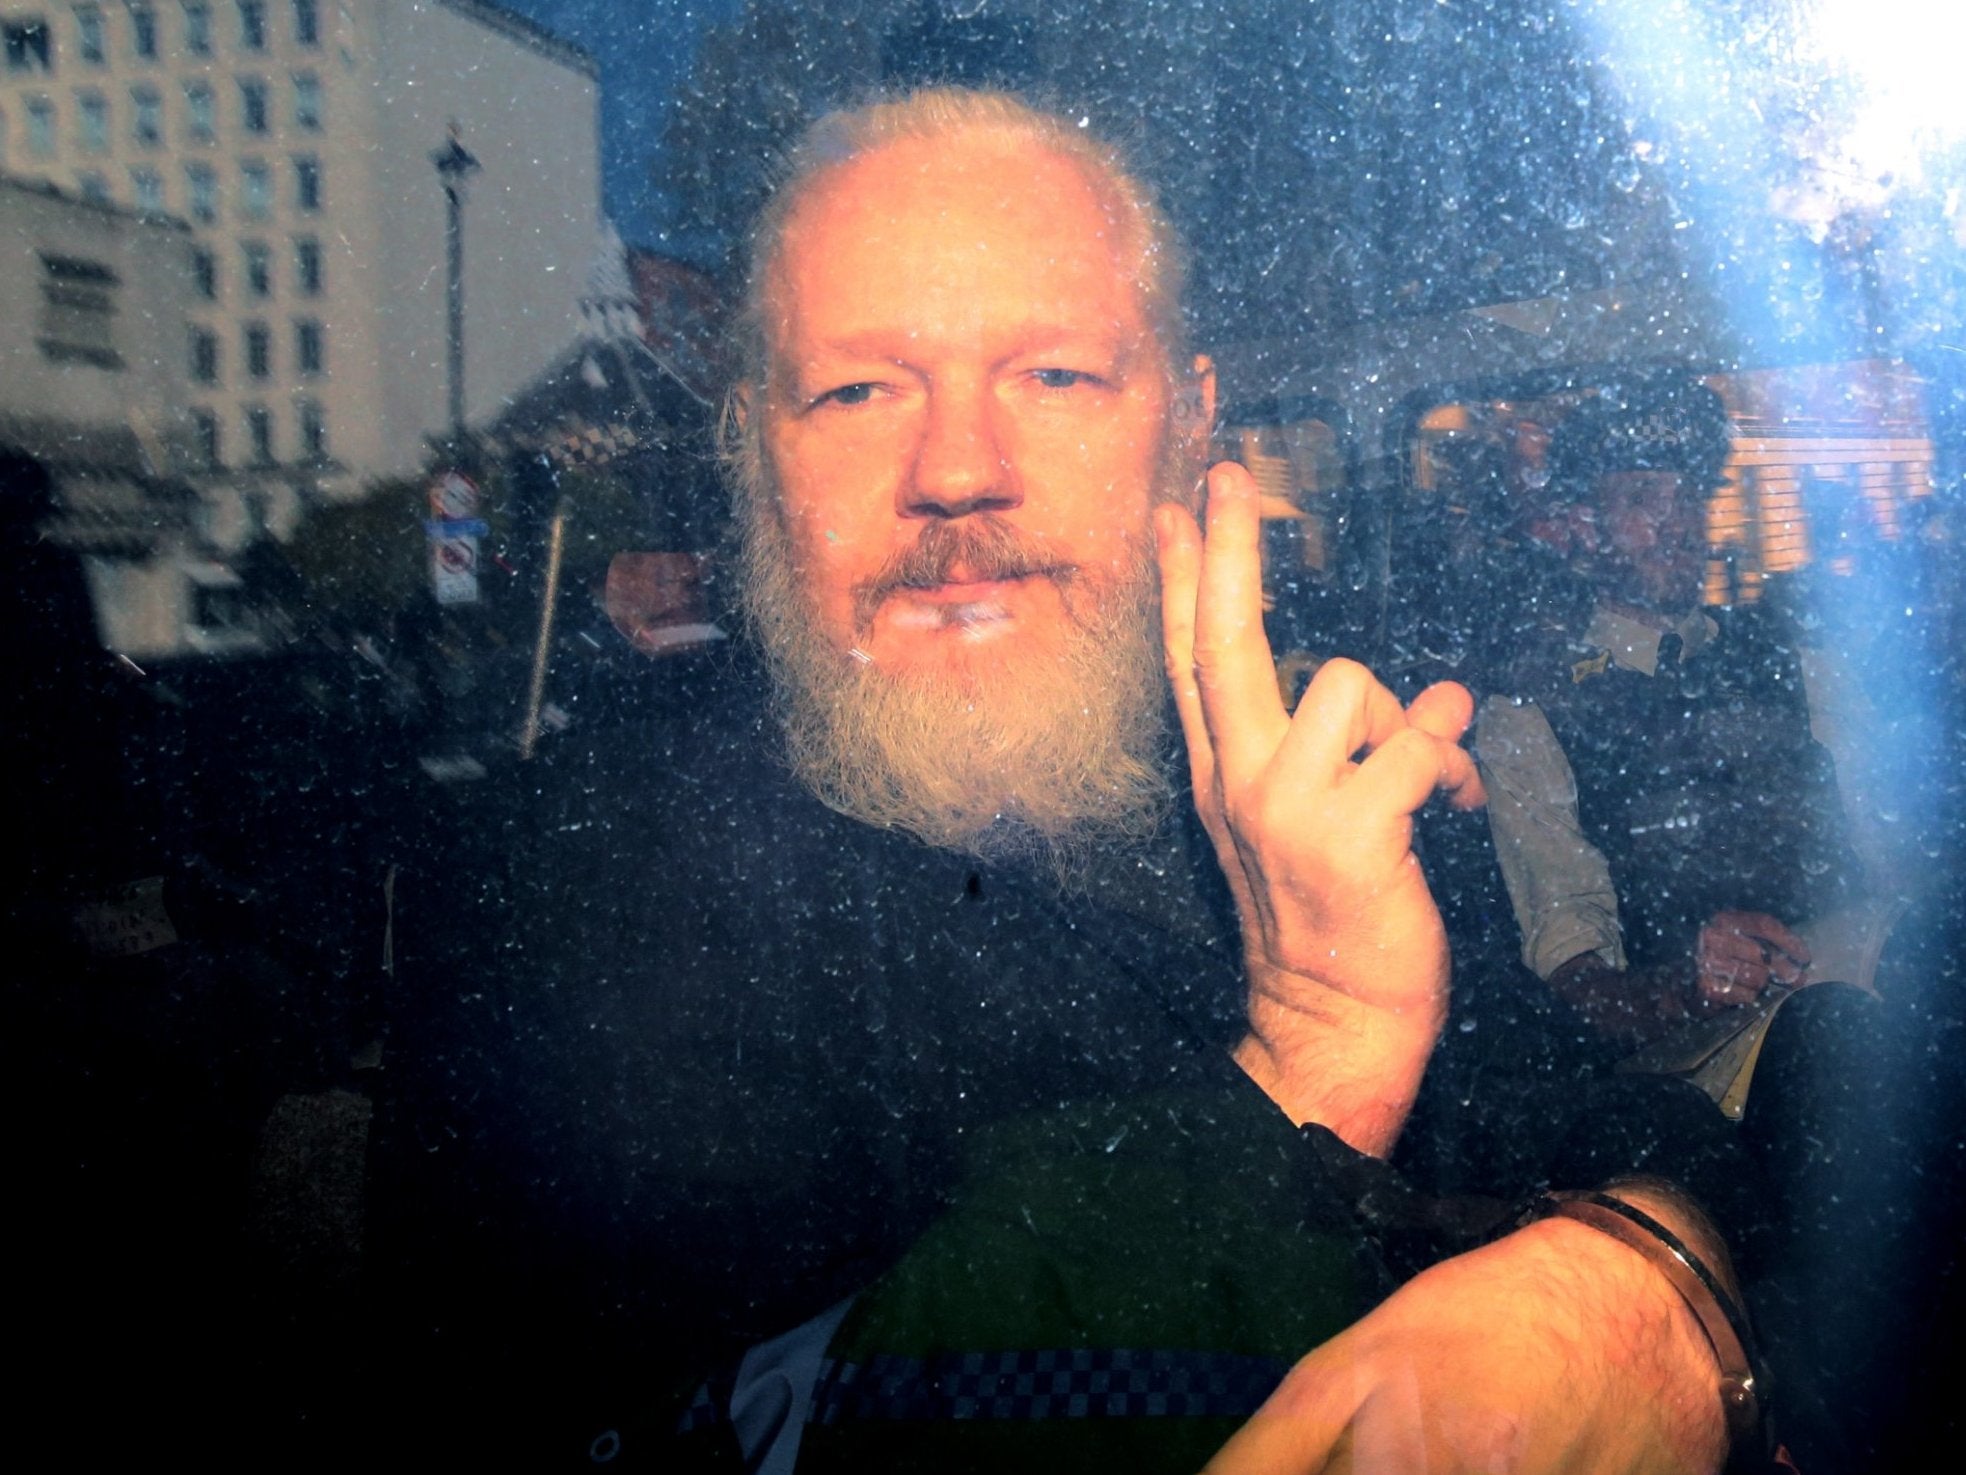 Julian Assange inside a police vehicle on his arrival at Westminster Magistrates’ Court last week.